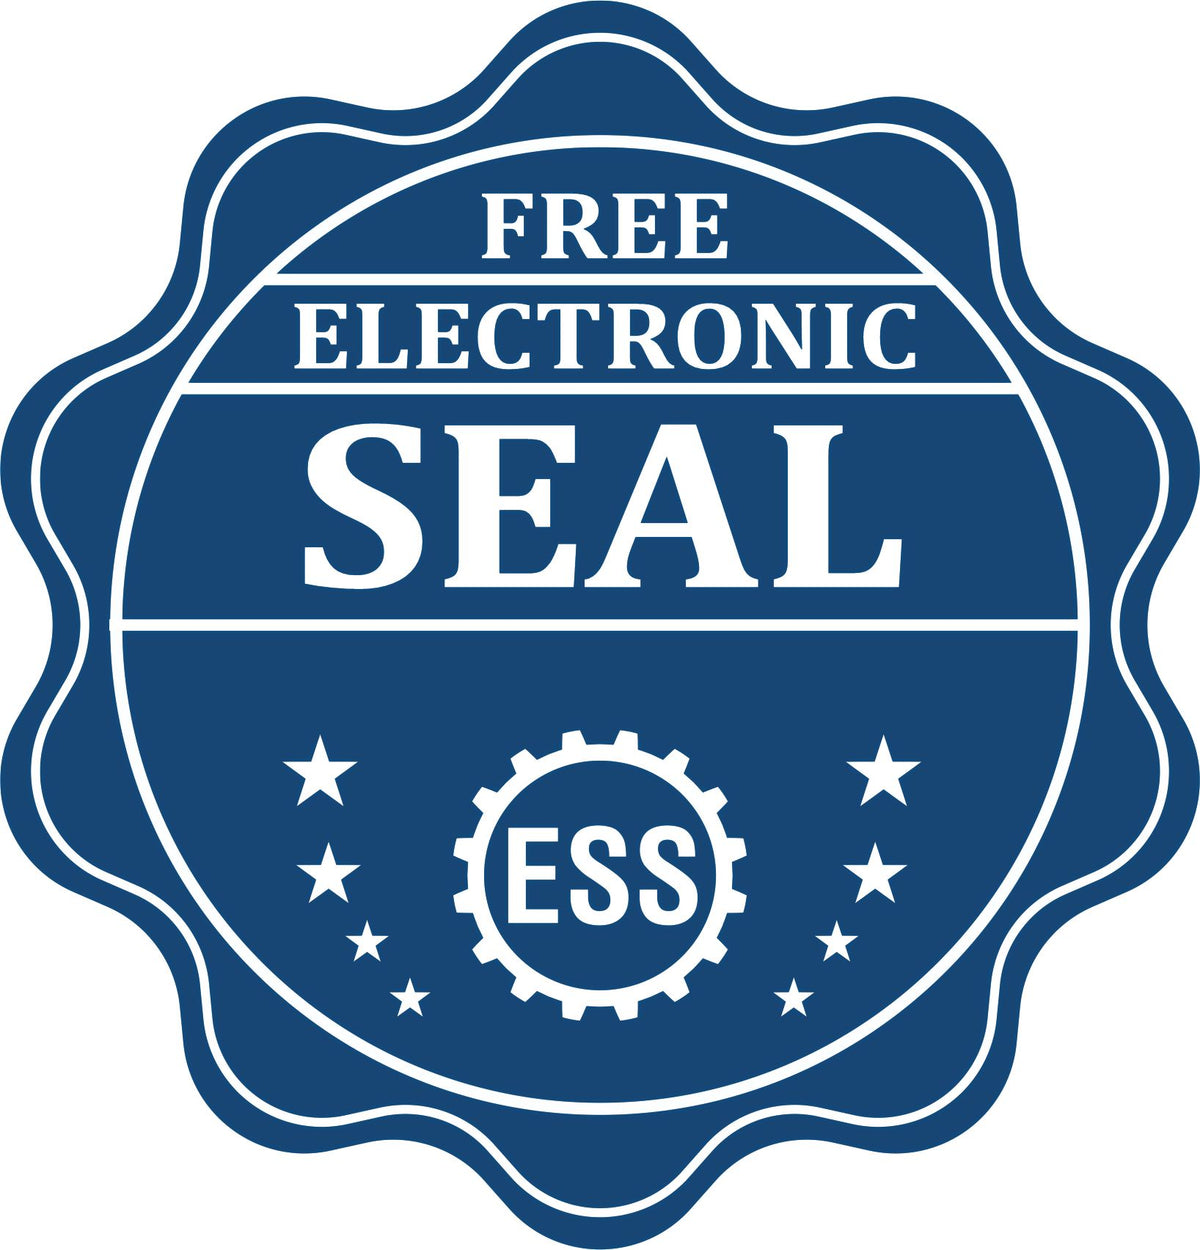 A badge showing a free electronic seal for the Heavy Duty Cast Iron Georgia Land Surveyor Seal Embosser with stars and the ESS gear on the emblem.